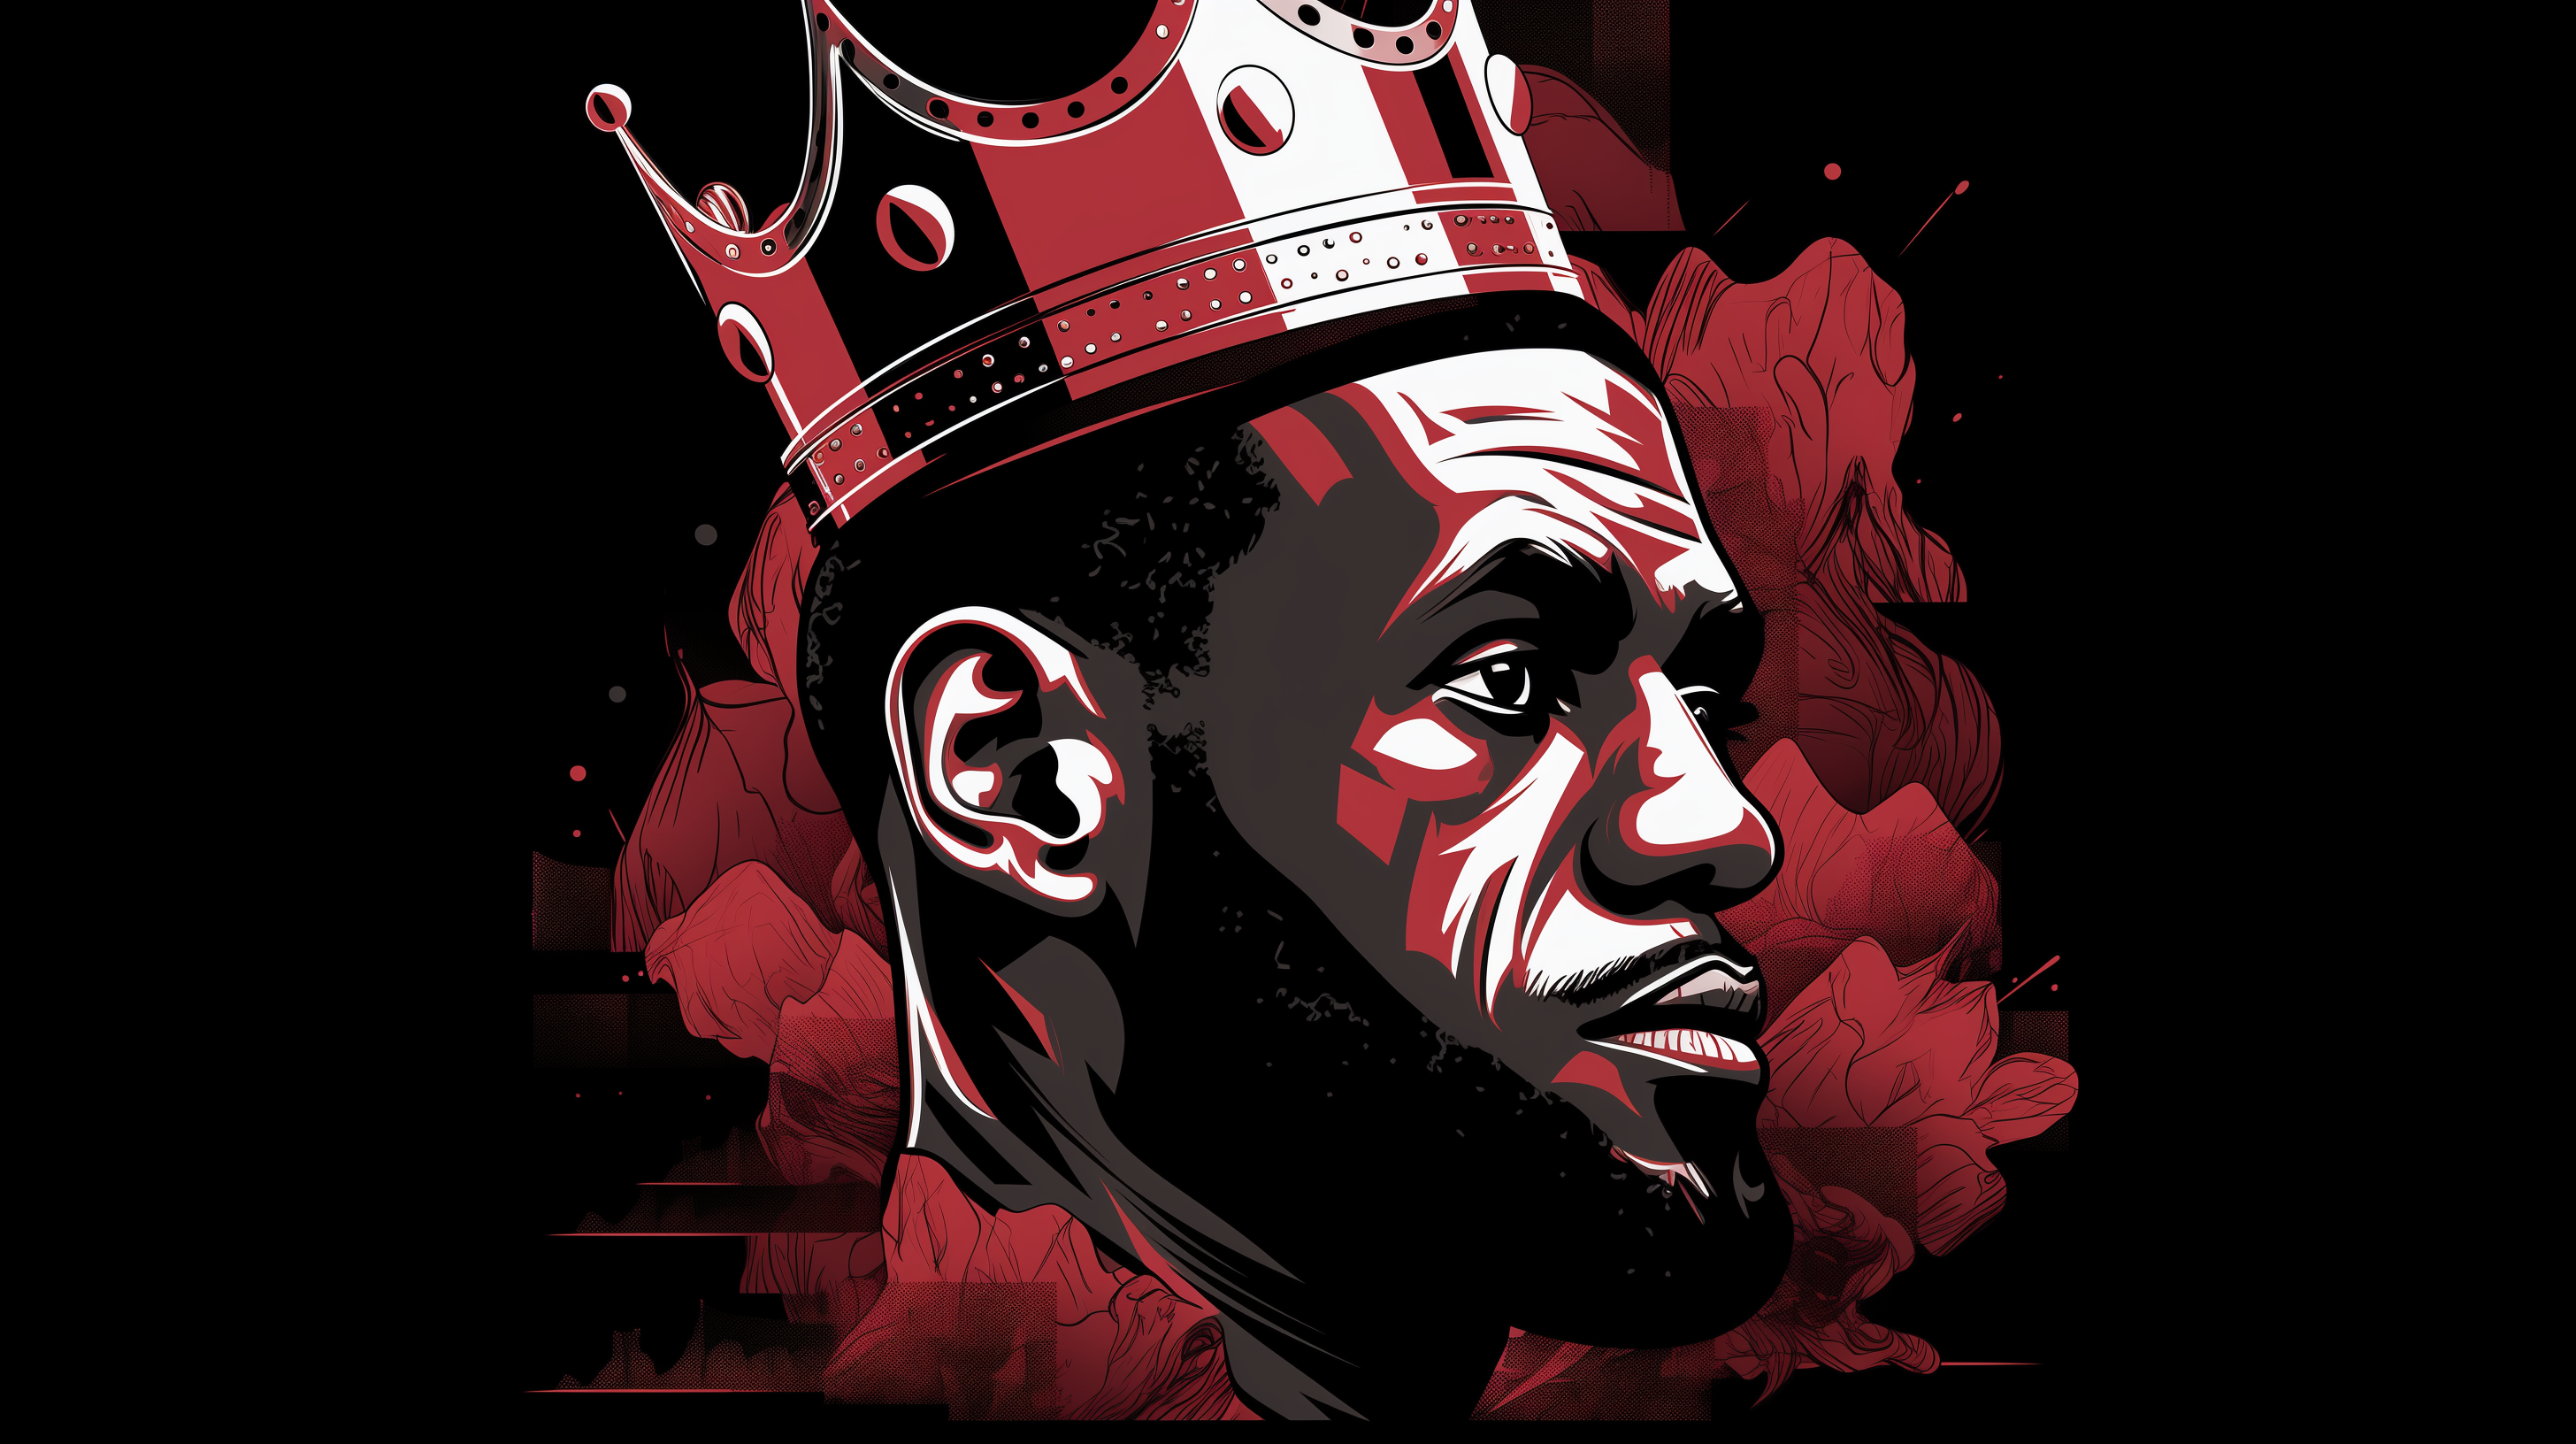 110+ LeBron James HD Wallpapers and Backgrounds